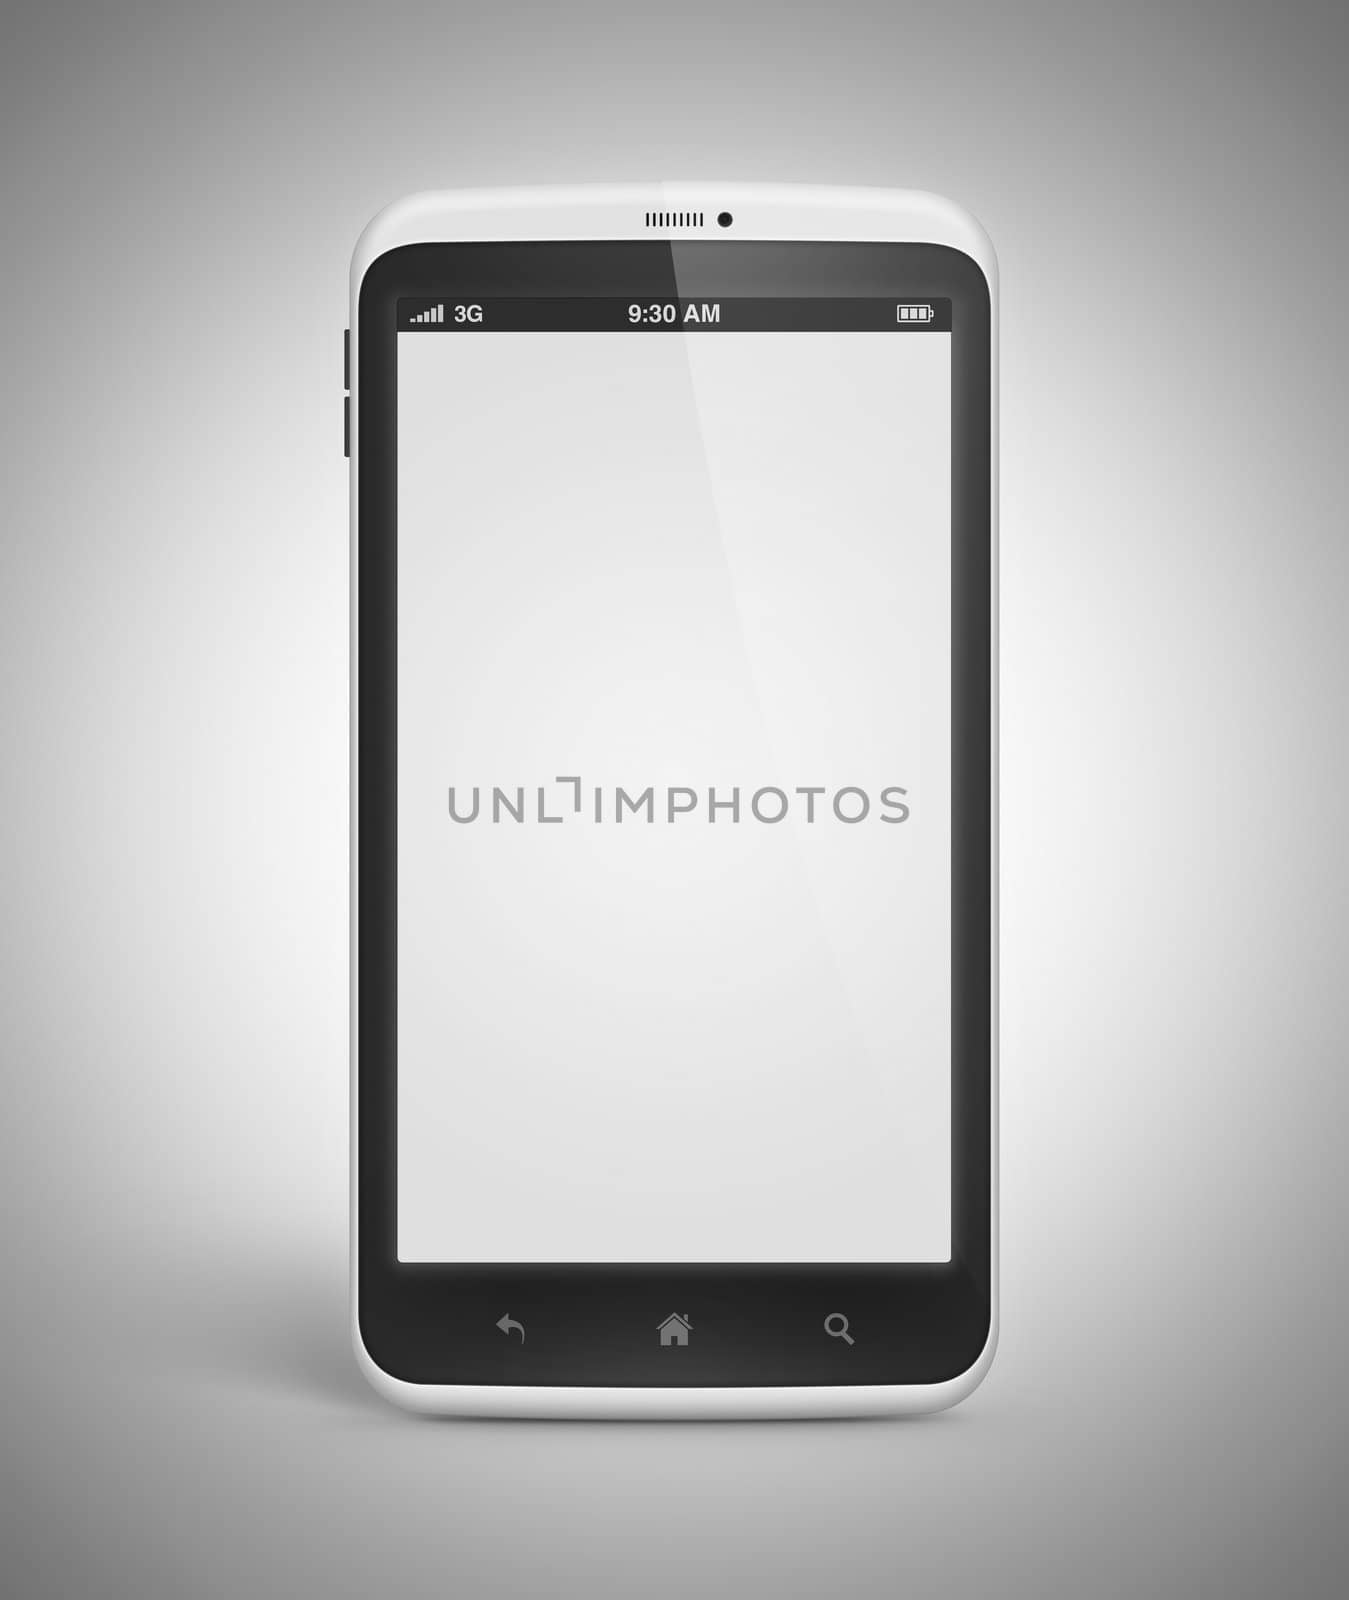 Modern mobile smartphone with blank screen isolated on gray background. Include clipping path for phone and screen.